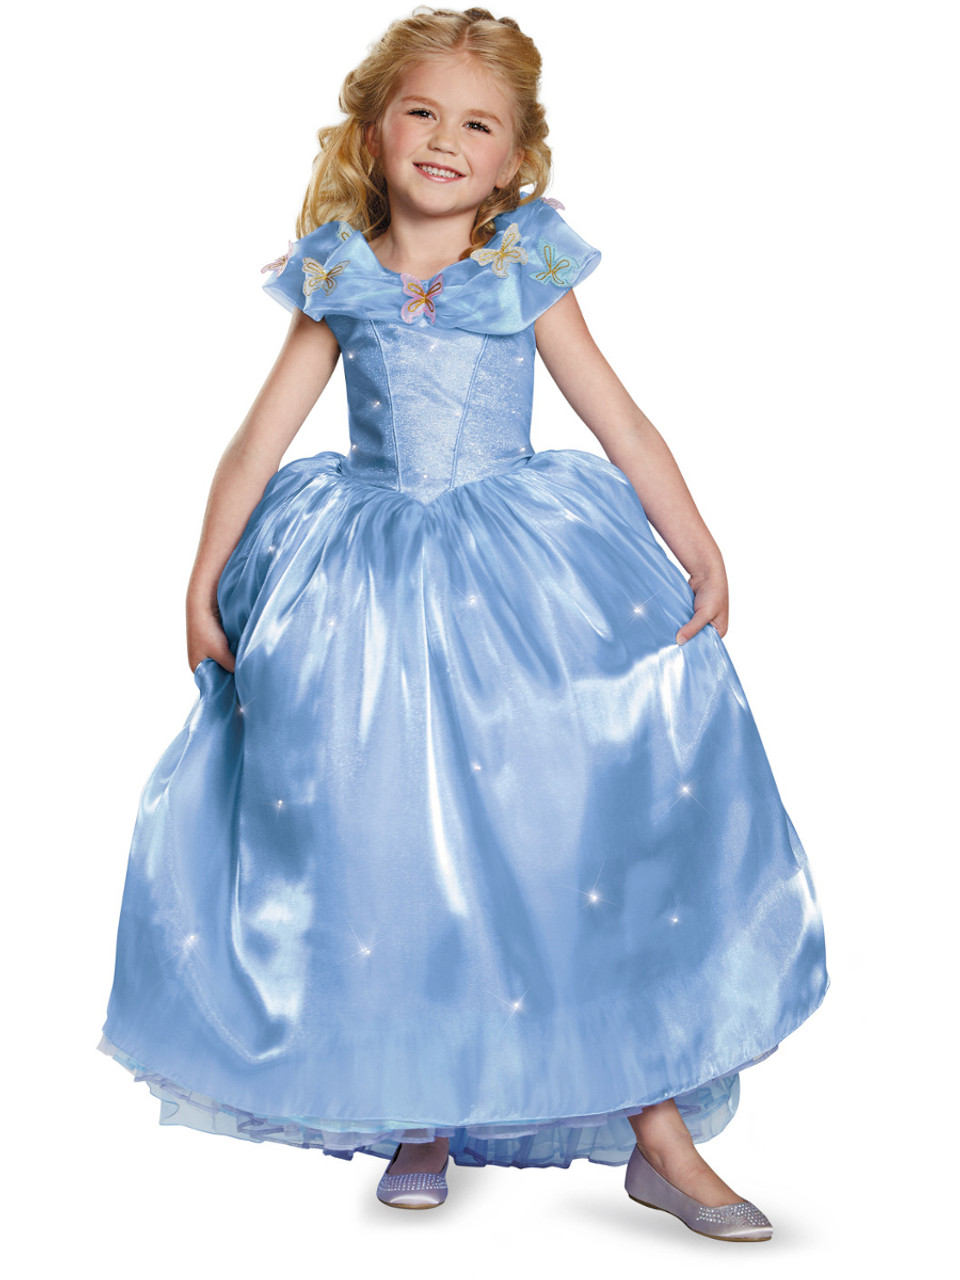 Girls Cinderella Fancy Dress Costume | Easy Movie Character Costumes